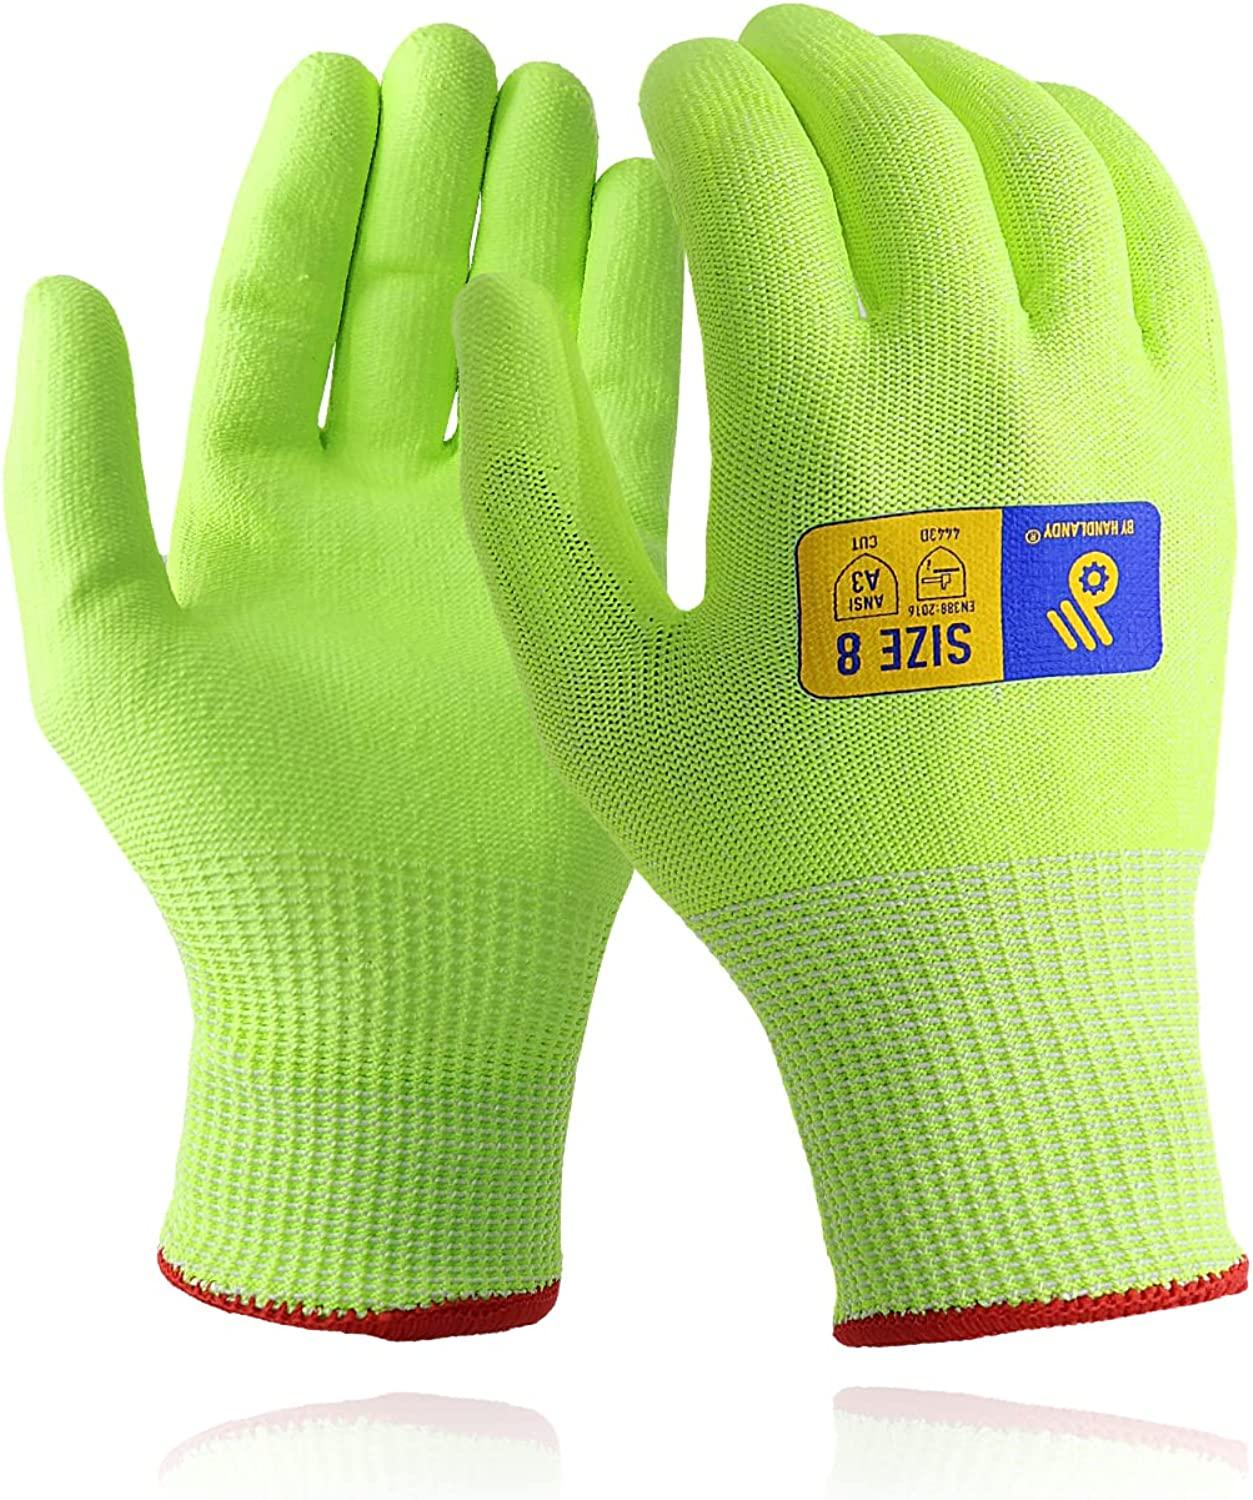 PRI breathable cotton jersey fully dipped construction safety work gloves 1130